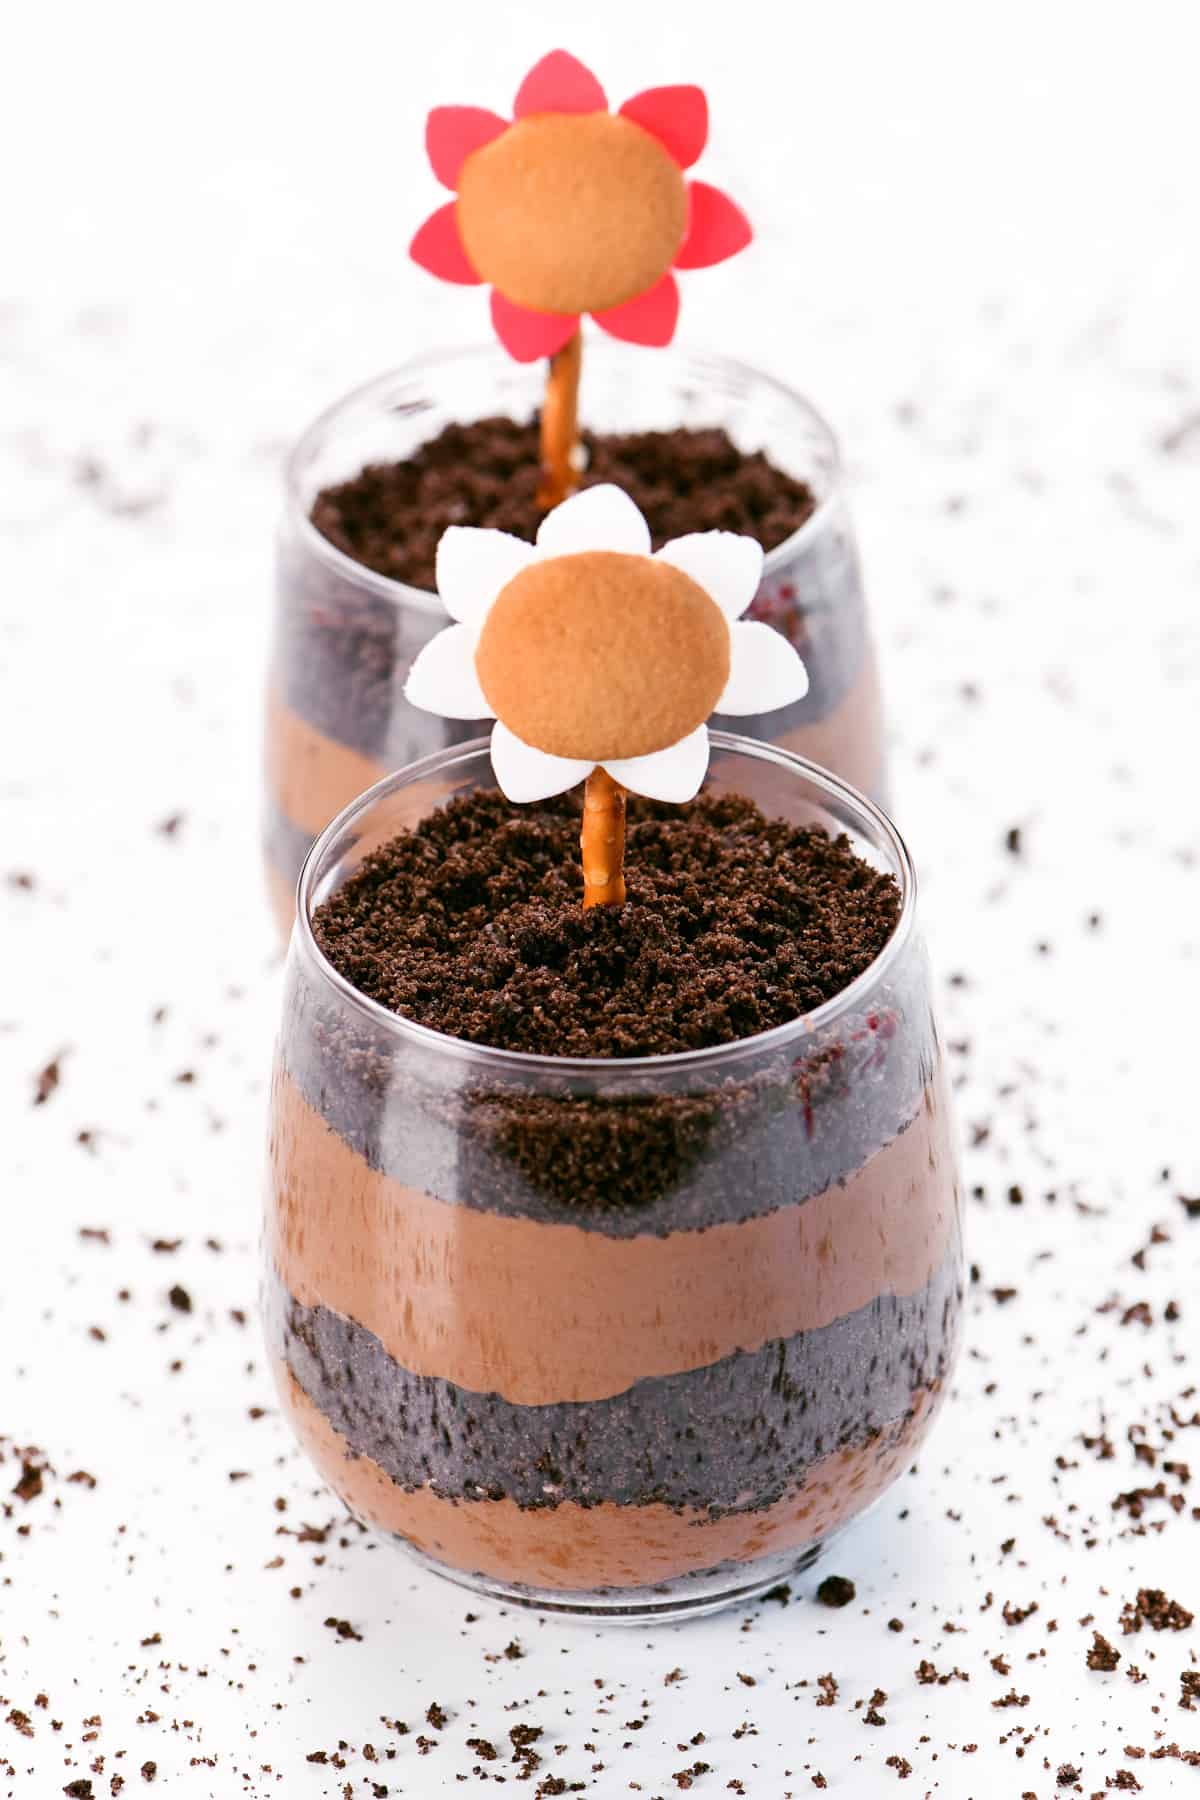 Dirt cake pudding cups with edible flowers on top.